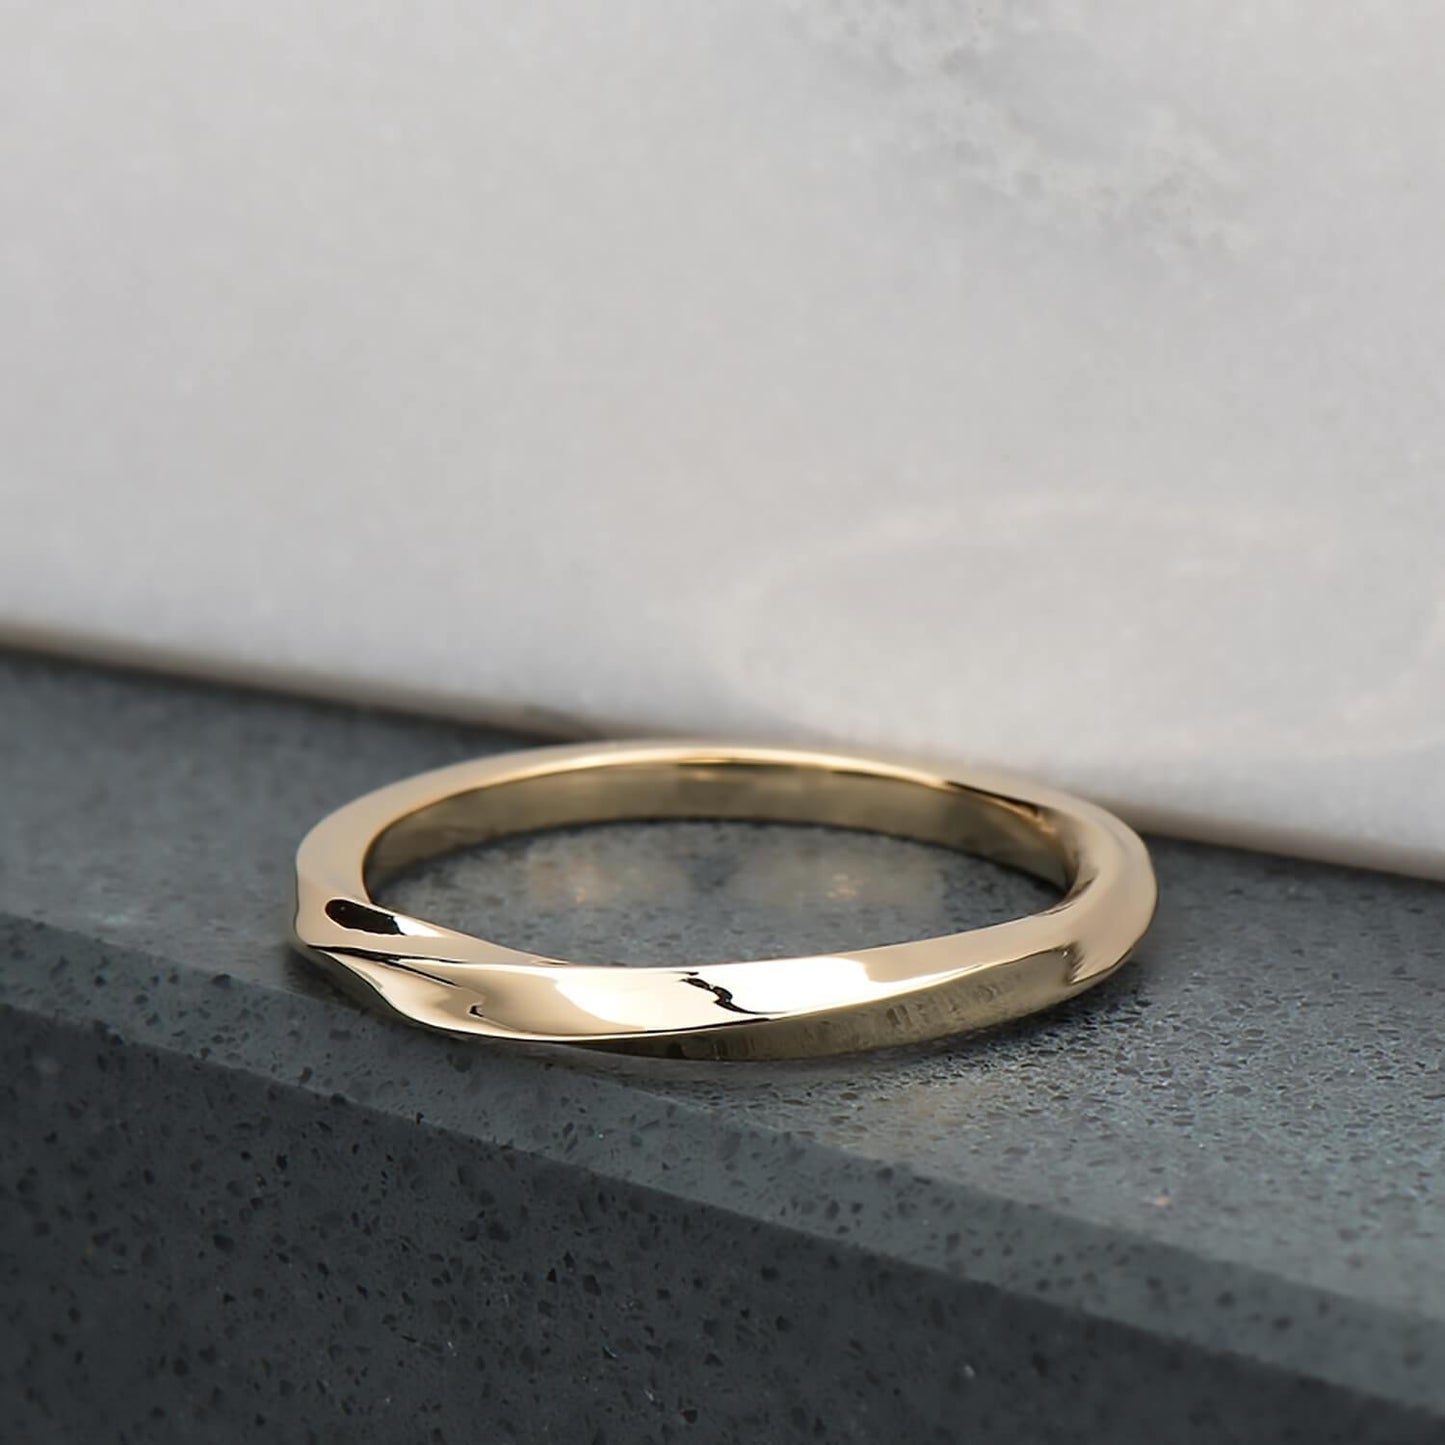 Recycled 10 karat yellow gold with a half twist, the ring is 2mm in its width & thickness. It has been finished with a high mirror polish.